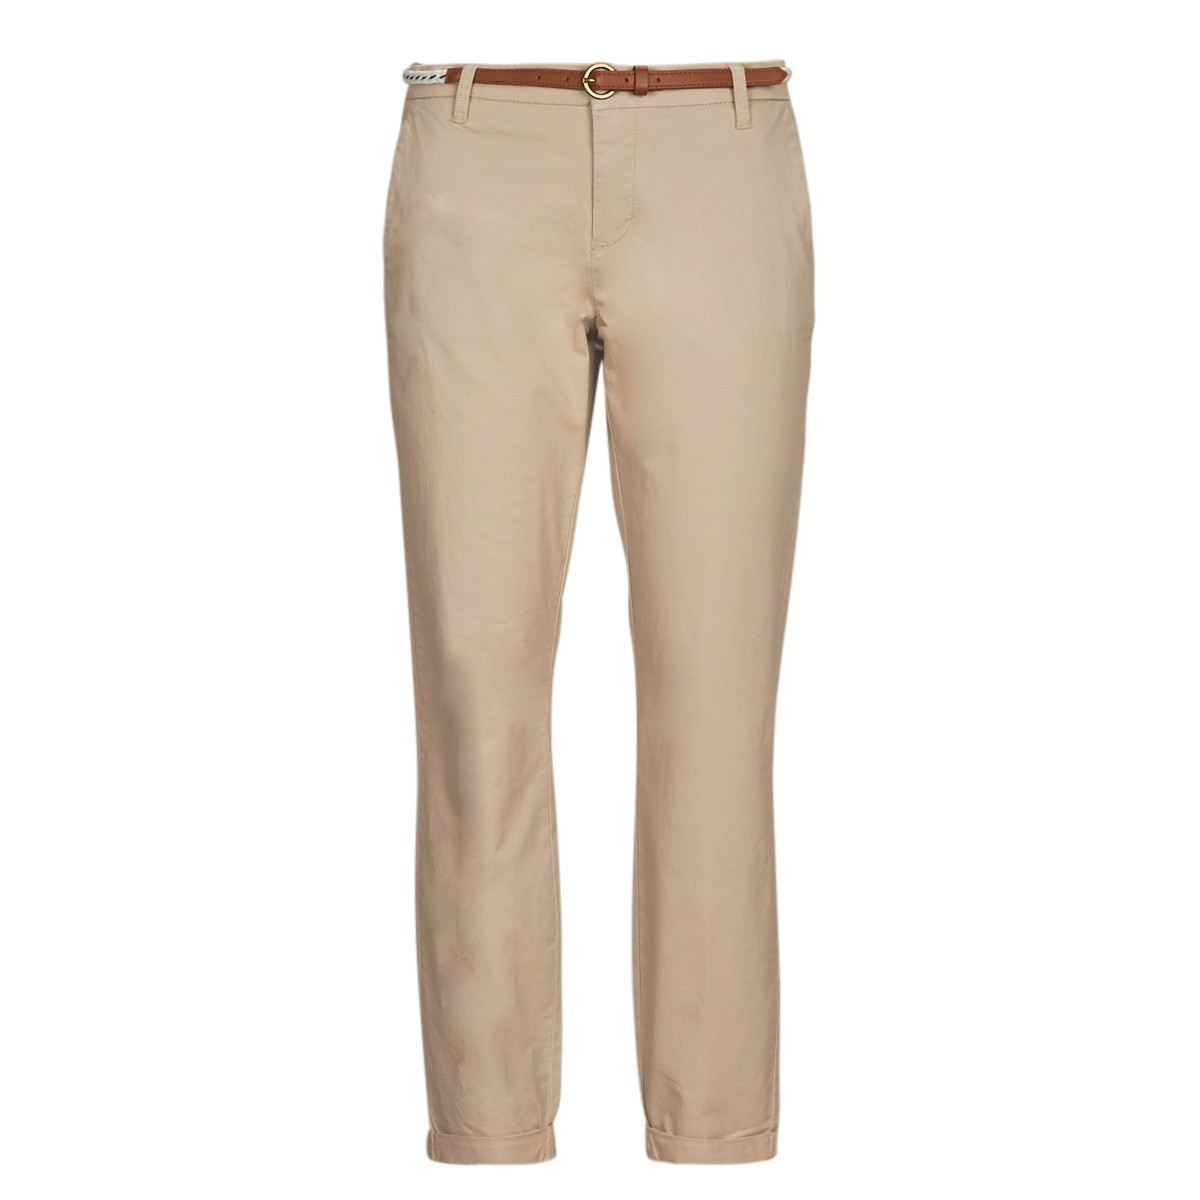 Only ONLBIANA COTTON BELT PNT ! Free - - chinos Women CHINO | Spartoo CC Beige delivery NET Clothing